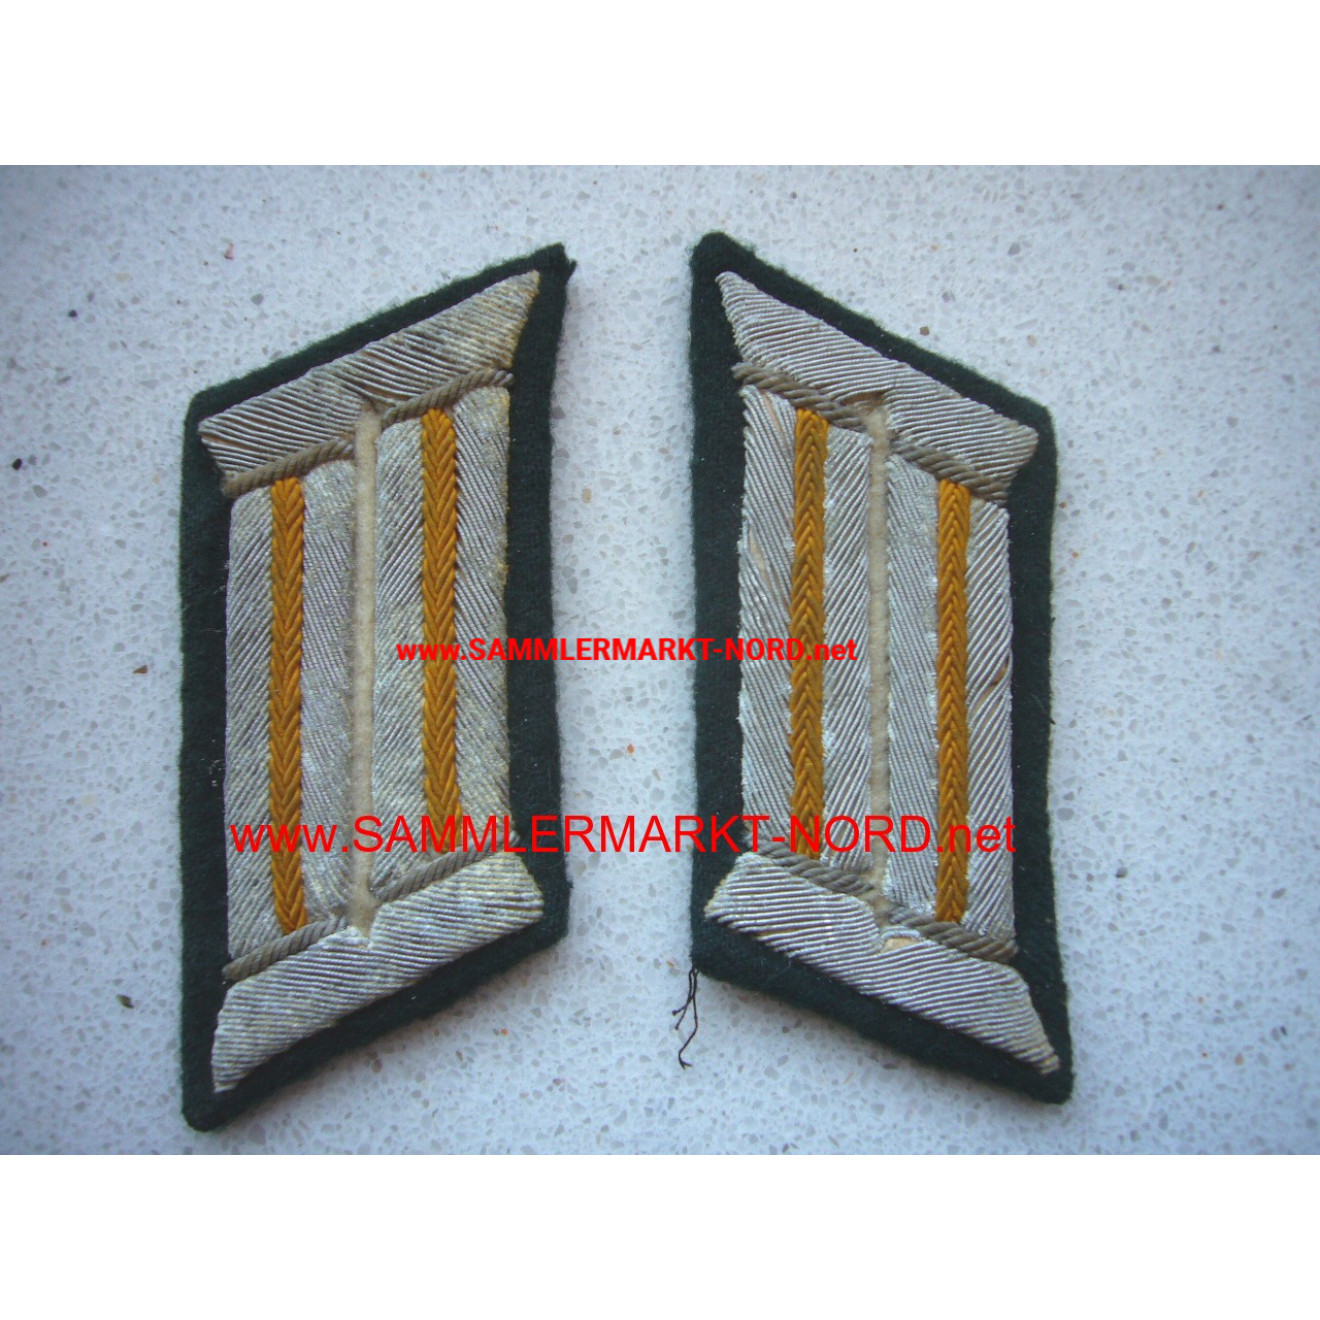 Kriegsmarine - A pair collar patches for officers of the coastal